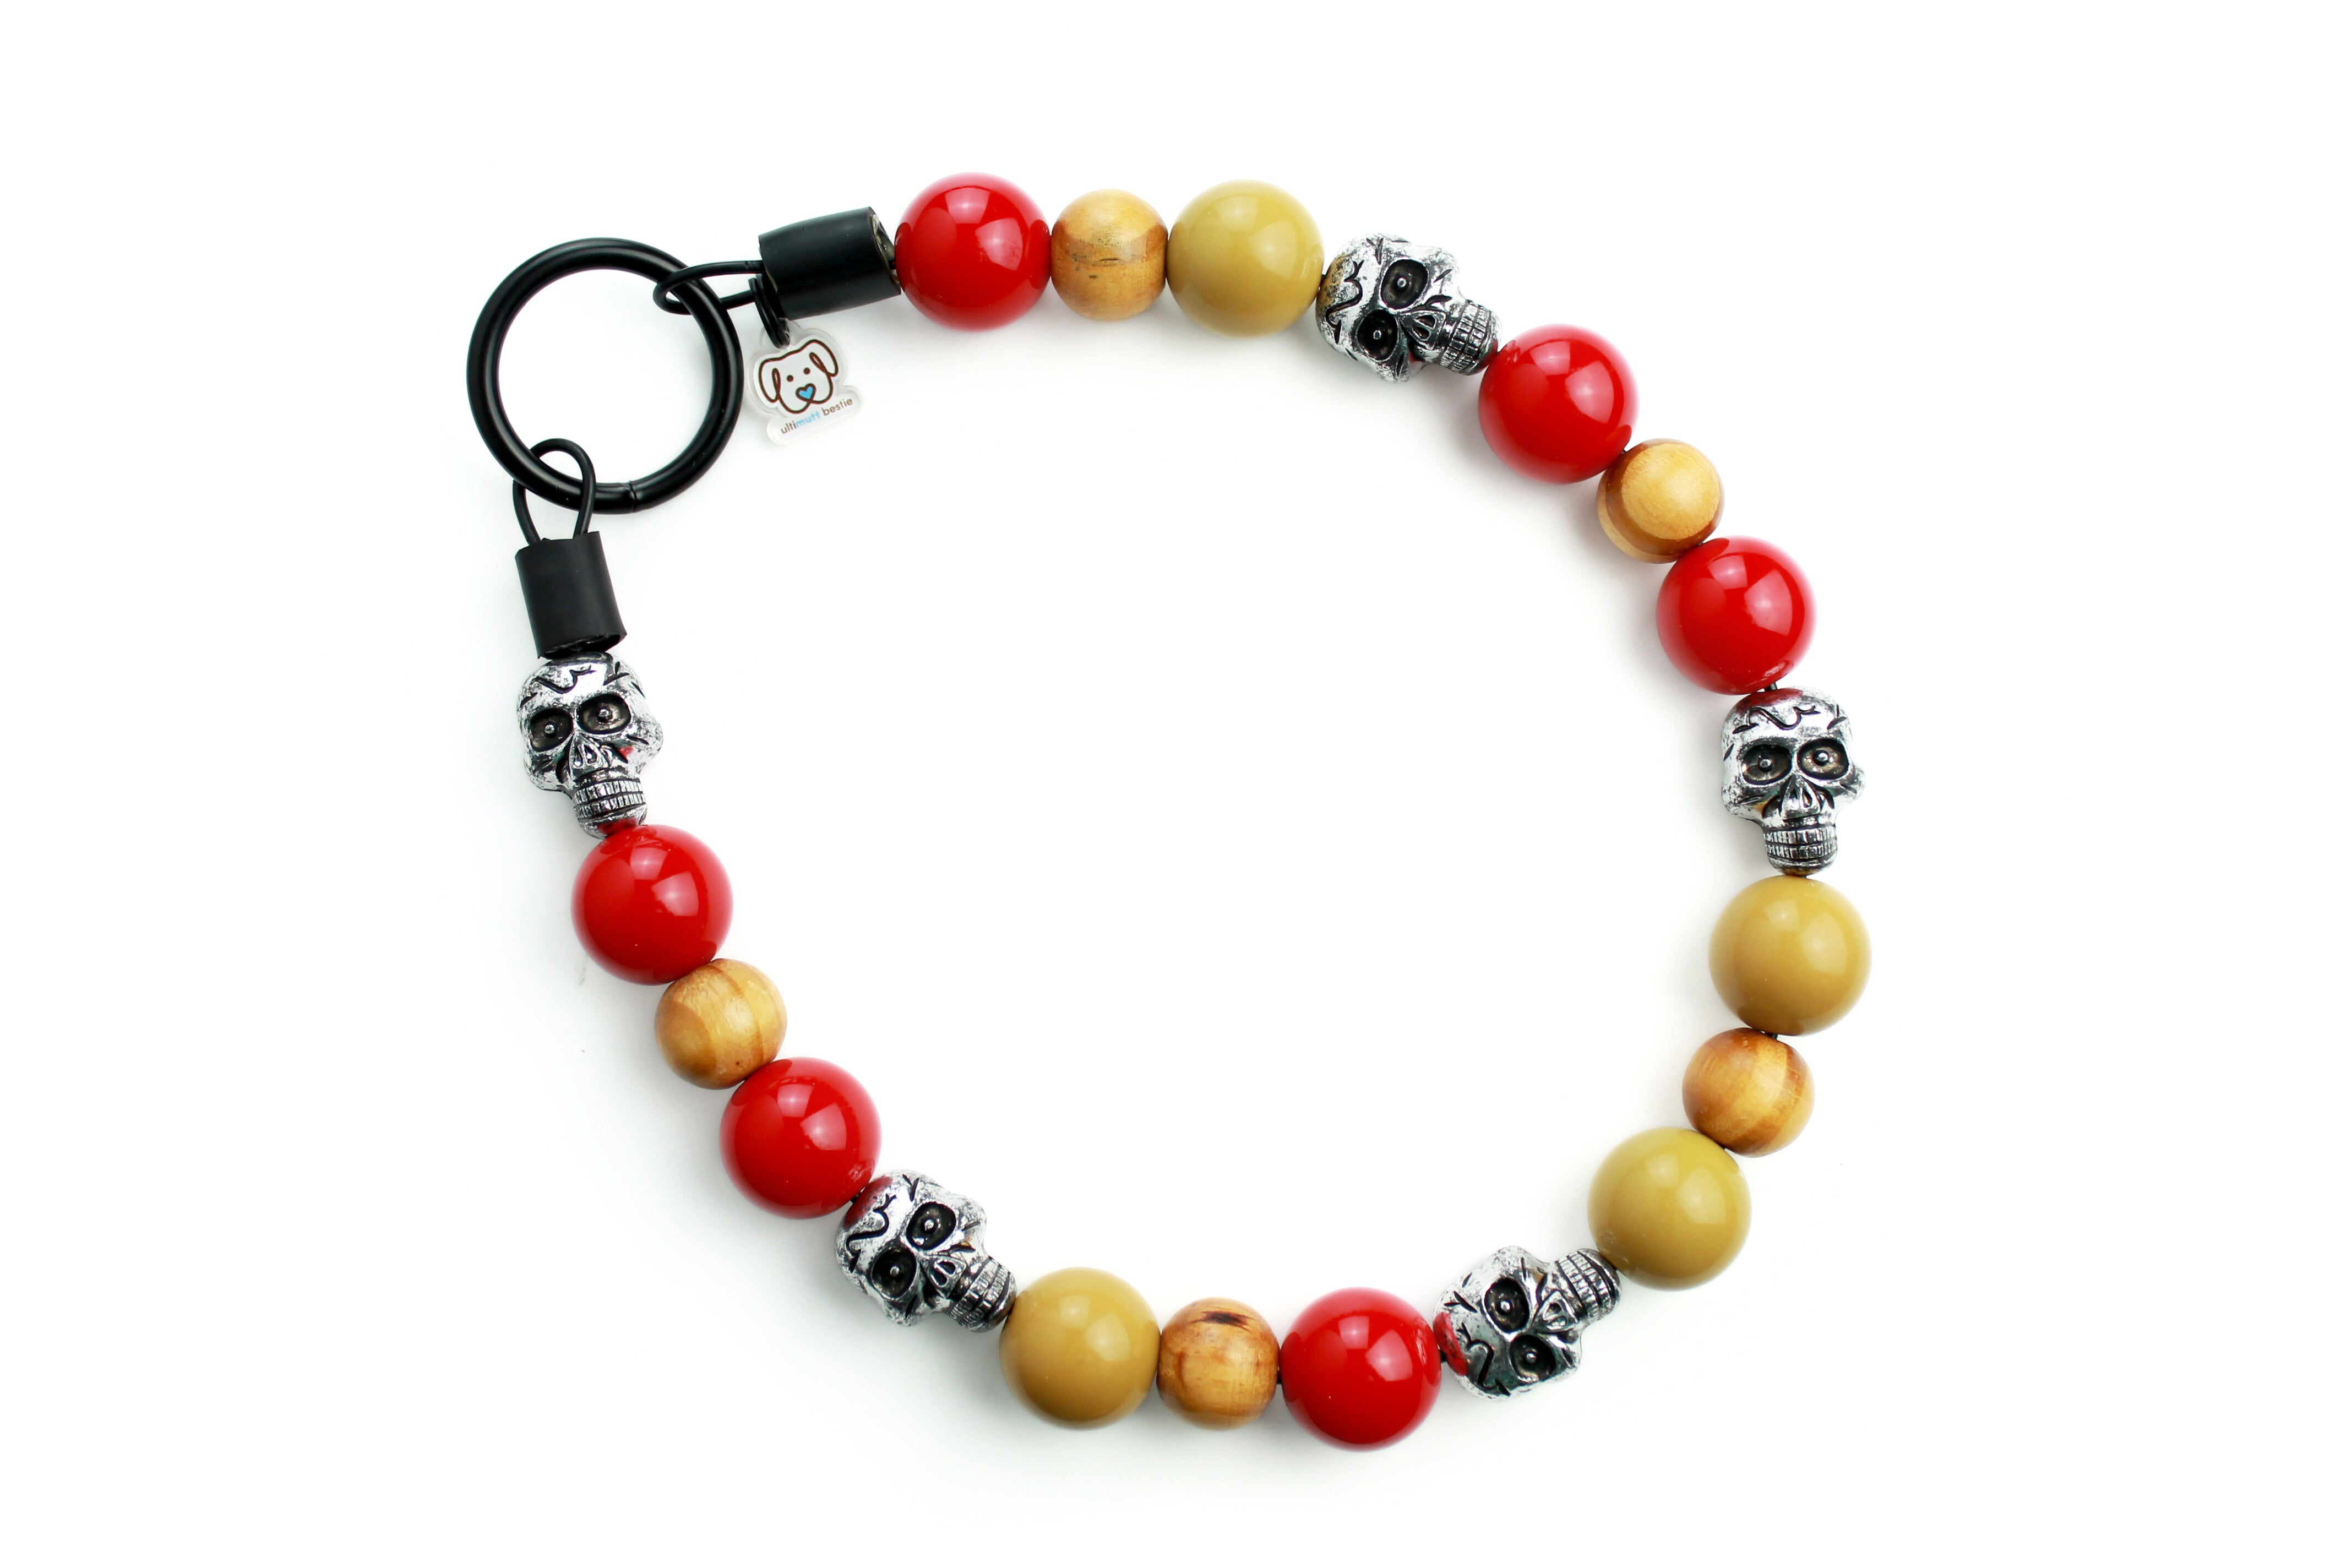 Boneyard Blitz collar with silver antique skulls, red and lite olive solid accompanied with wood beads closure is a black welded O'ring